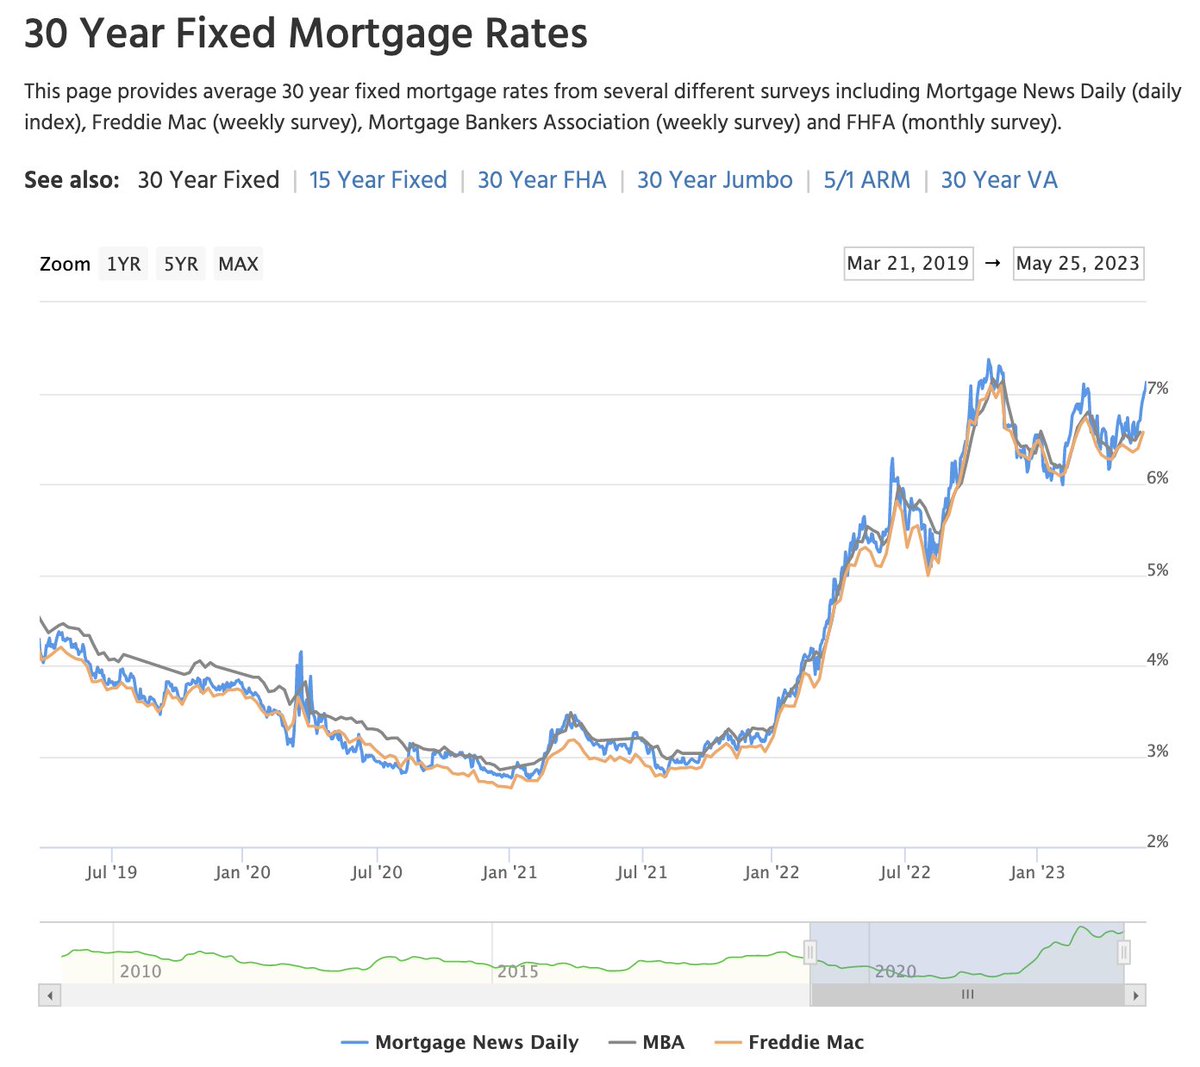 🇺🇸🏠US 30-year fixed mortgage rates reach new high at 7.12%, highest since Nov. '21 (7.37%).
Source: @mortgagenewsmnd